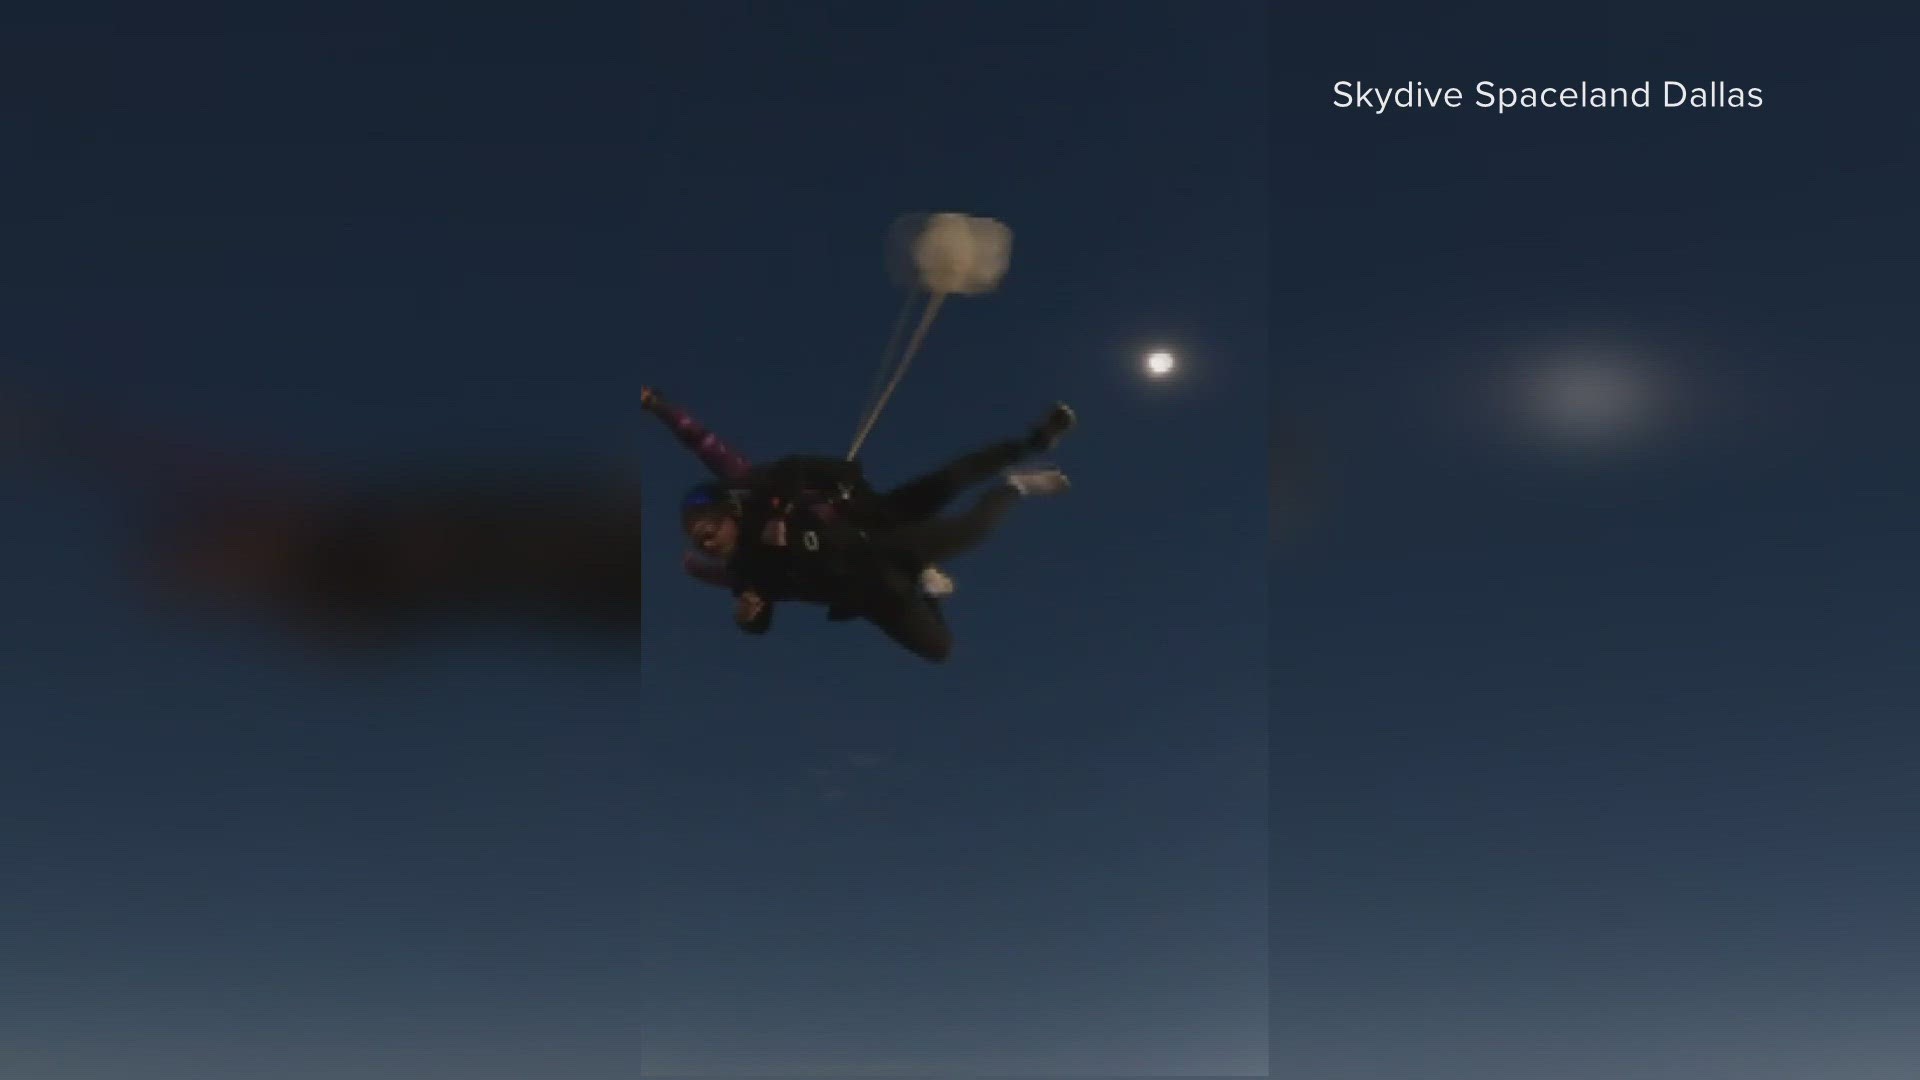 The planets and stars aligned perfectly for these skydivers, who dropped from a plane during the total solar eclipse on Monday afternoon.